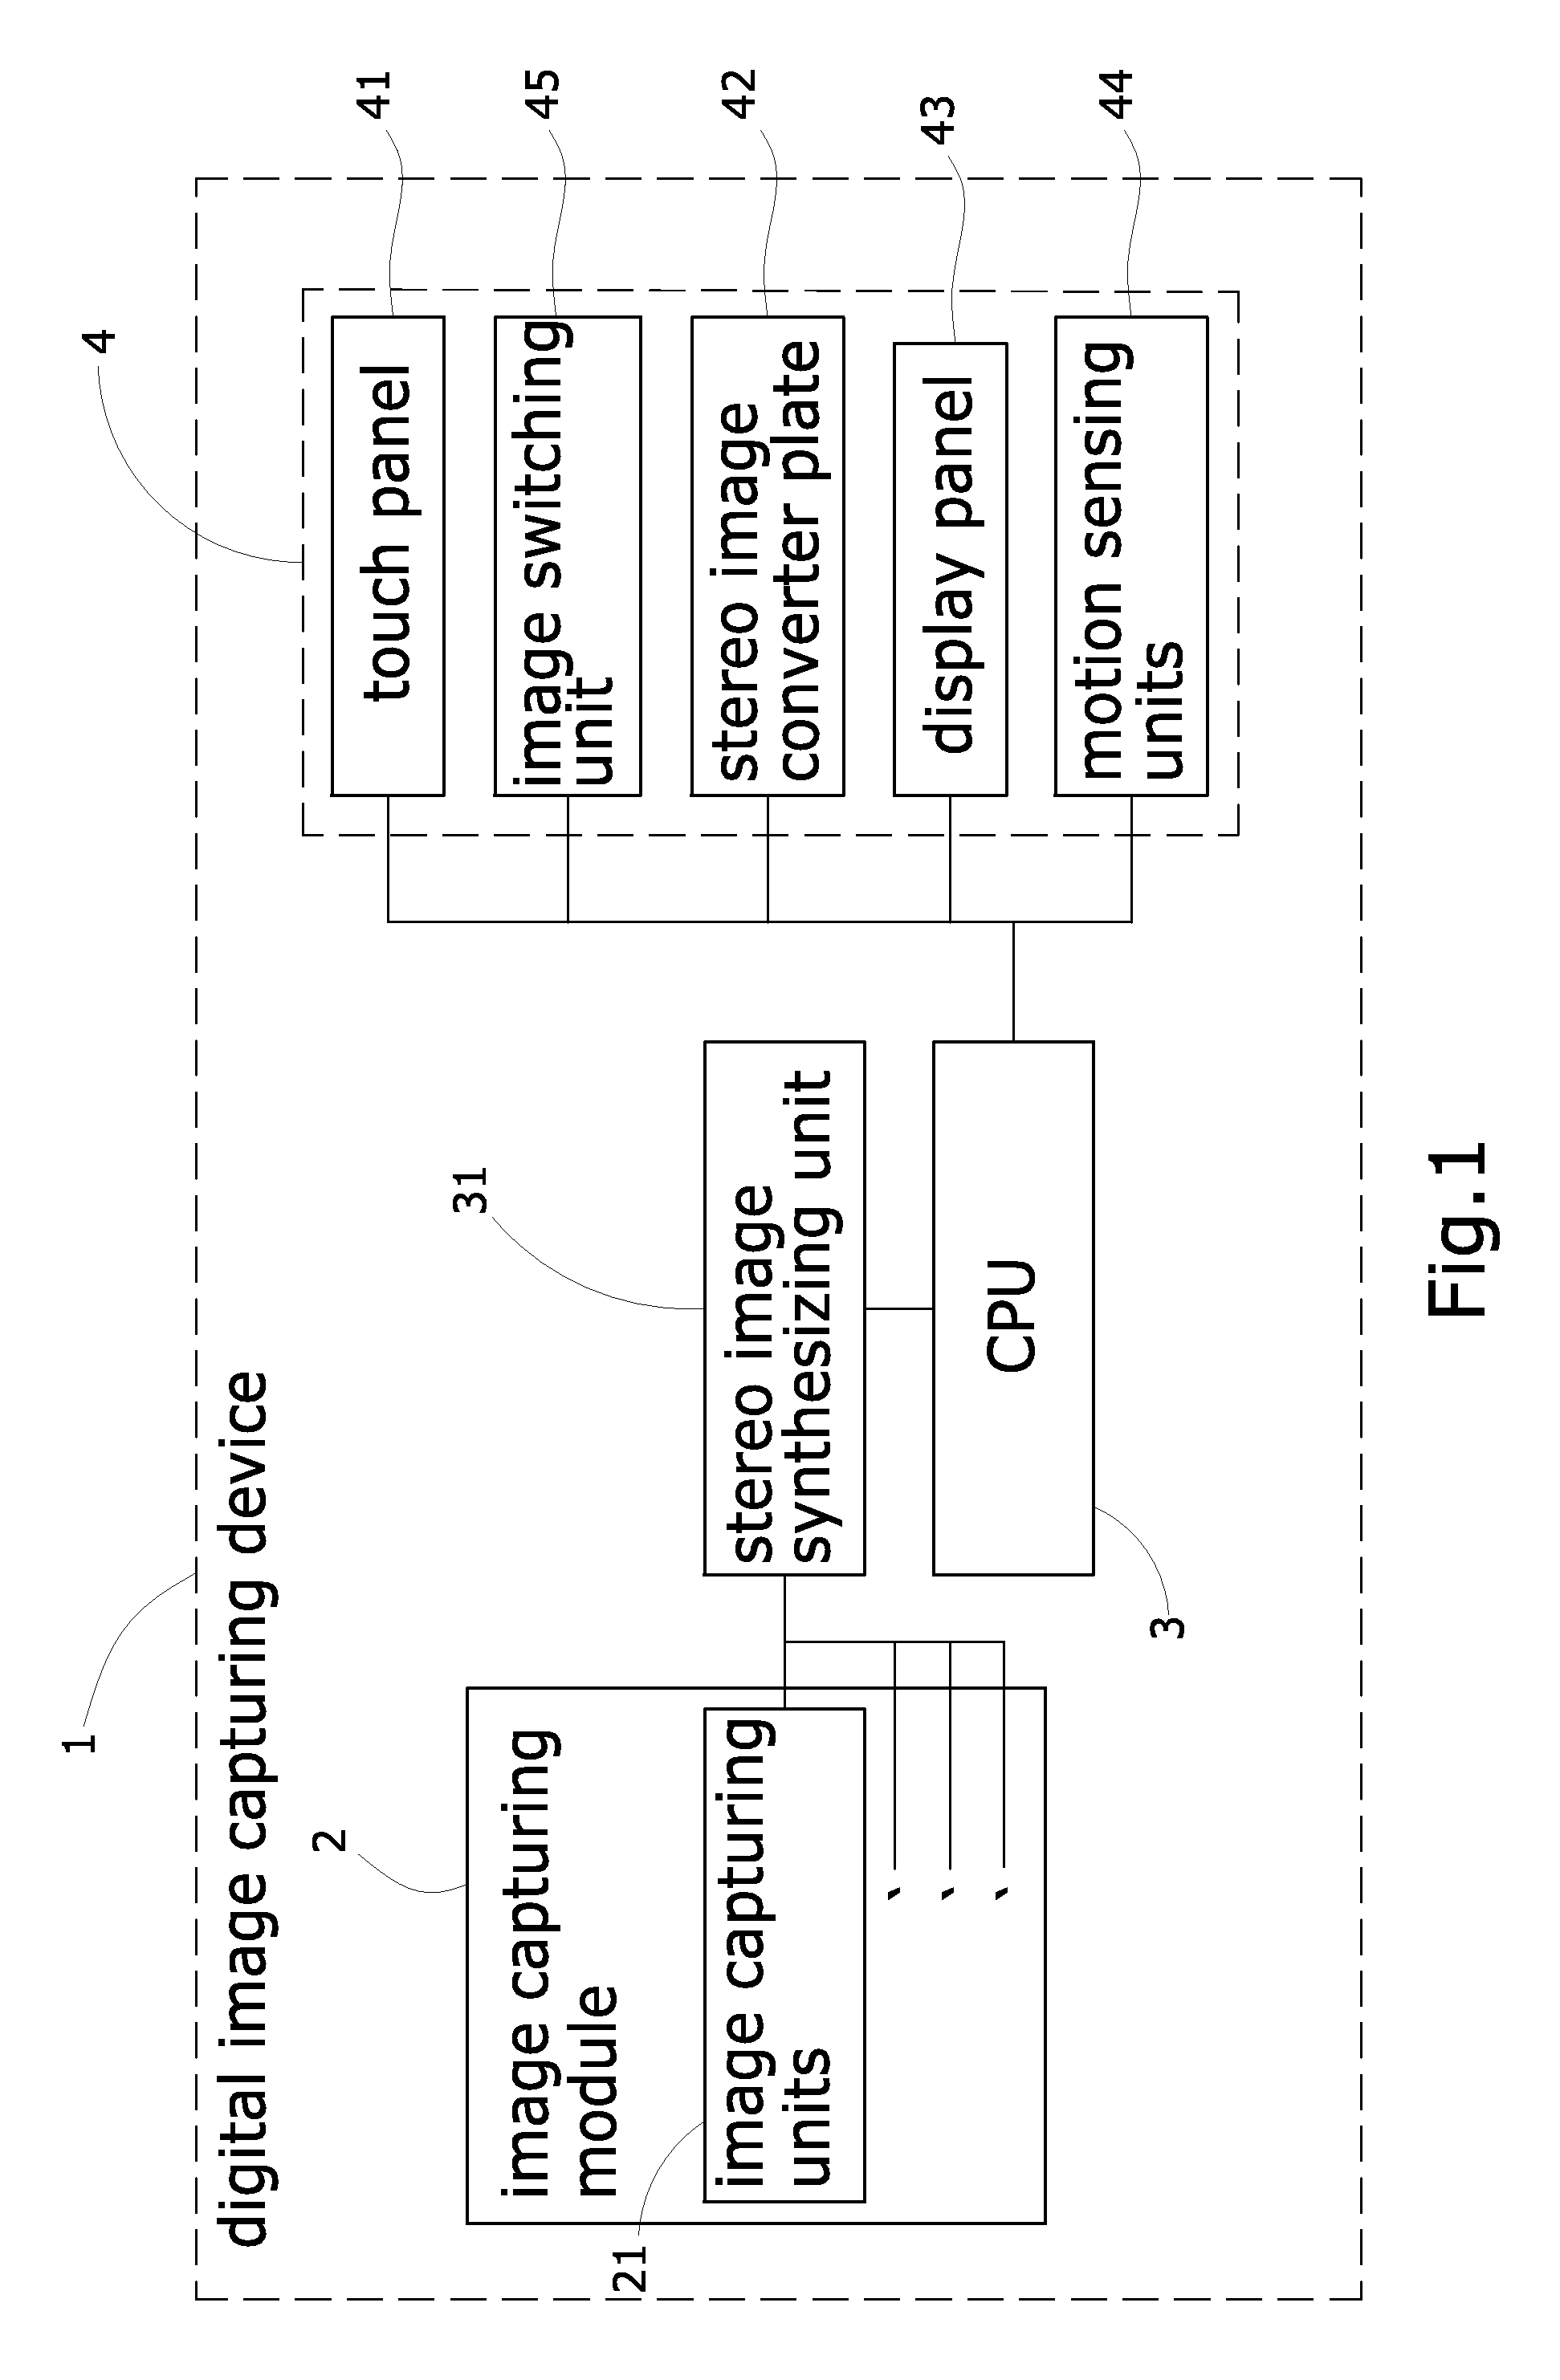 Digital image capturing device with stereo image display and touch functions